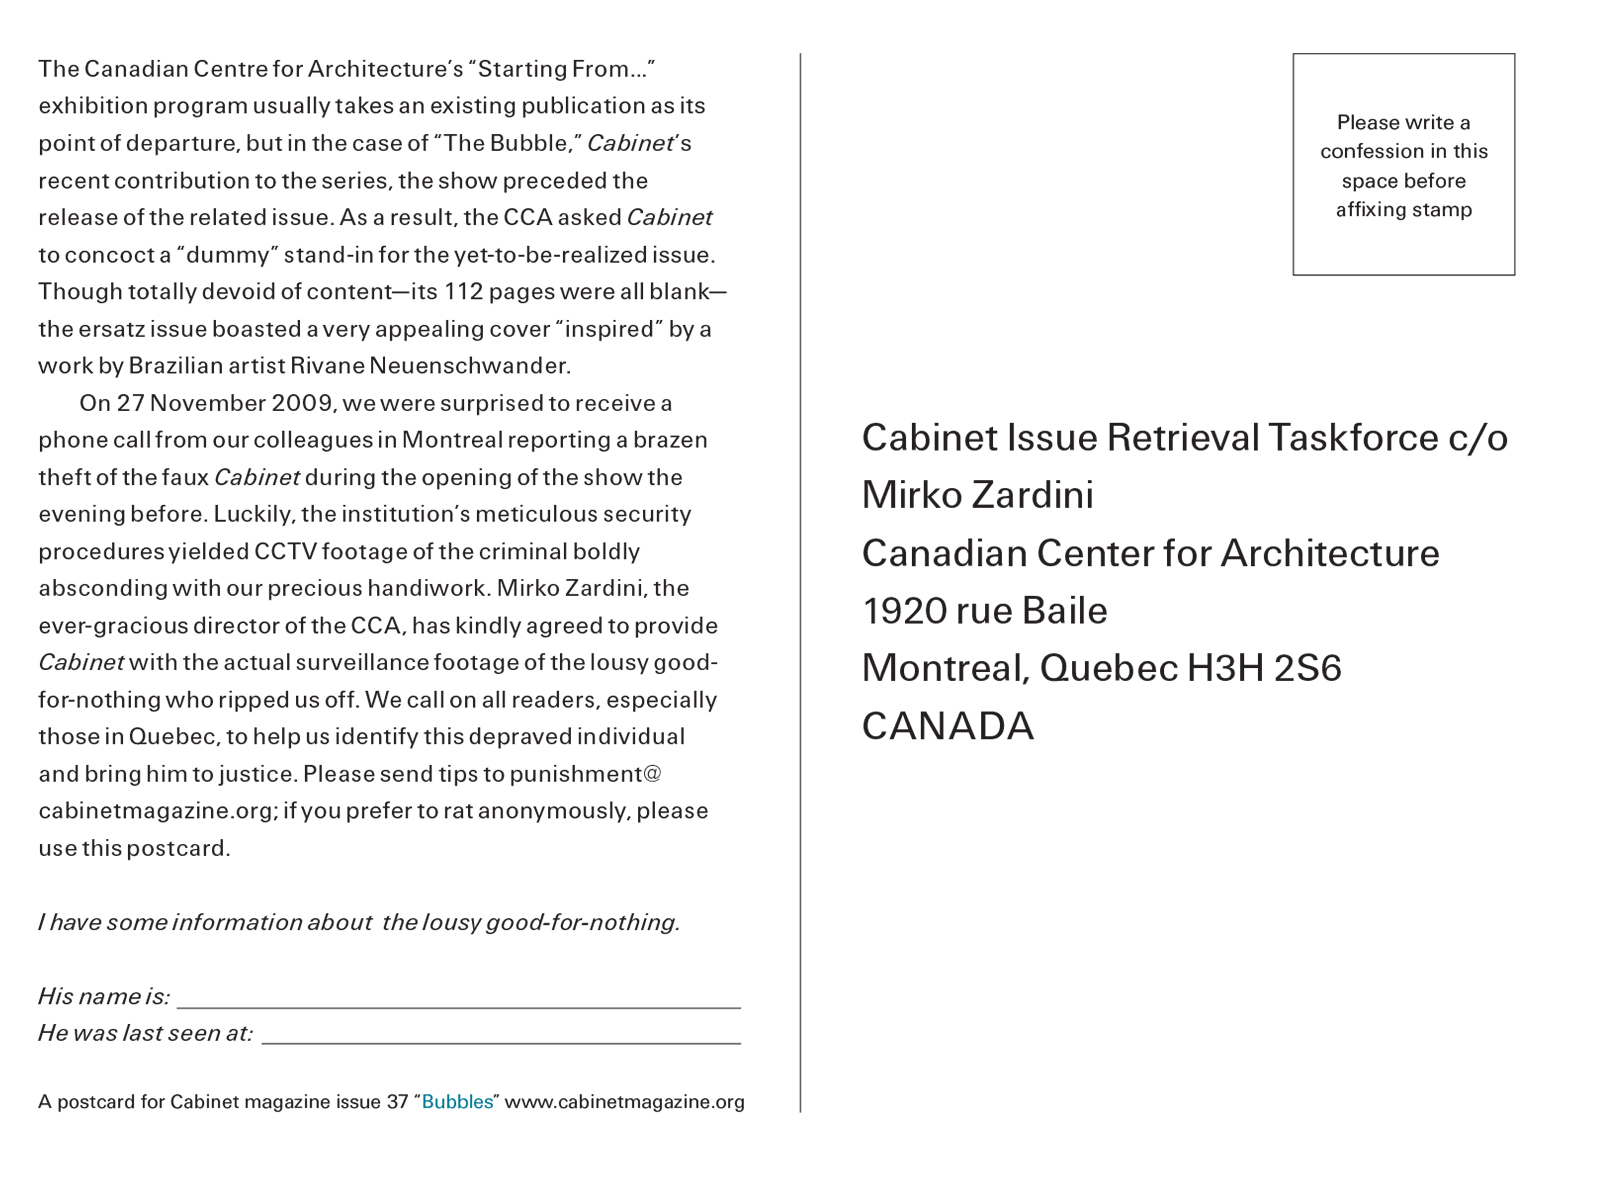 The back of this issue’s postcard, which bears the following text: The Canadian Centre for Architecture’s “Starting From…” exhibition program usually takes an existing publication as its point of departure, but in the case of “The Bubble,” Cabinet’s recent contribution to the series, the show preceded the release of the related issue. As a result, the CCA asked Cabinet to concoct a “dummy” stand-in for the yet-to-be-realized issue. Though totally devoid of content—its 112 pages were all blank—the ersatz issue boasted a very appealing cover “inspired” by a work by Brazilian artist Rivane Neuenschwander. On 27 November two thousand and nine, we were surprised to receive a phone call from our colleagues in Montreal reporting the brazen theft of the faux Cabinet during the opening of the show the evening before. Luckily, the institution’s meticulous security procedures yielded CCTV footage of the criminal boldly absconding with our precious handiwork. Mirko Zardini, the ever-gracious director of the CCA, has kindly agreed to provide Cabinet with the actual surveillance footage of the lousy good-for-nothing who ripped us off. We call on all readers, especially those in Quebec, to help us identify this depraved individual and bring him to justice. Please send tips to punishment@cabinetmagazine.org; if you prefer to rat anonymously, please use this postcard.” The postcard then provided space for respondents to provide answers to the questions “His name is” and “He was last seen at.” Readers were asked for to send the card to a pre-printed address at the Candian Centre for Architecture.